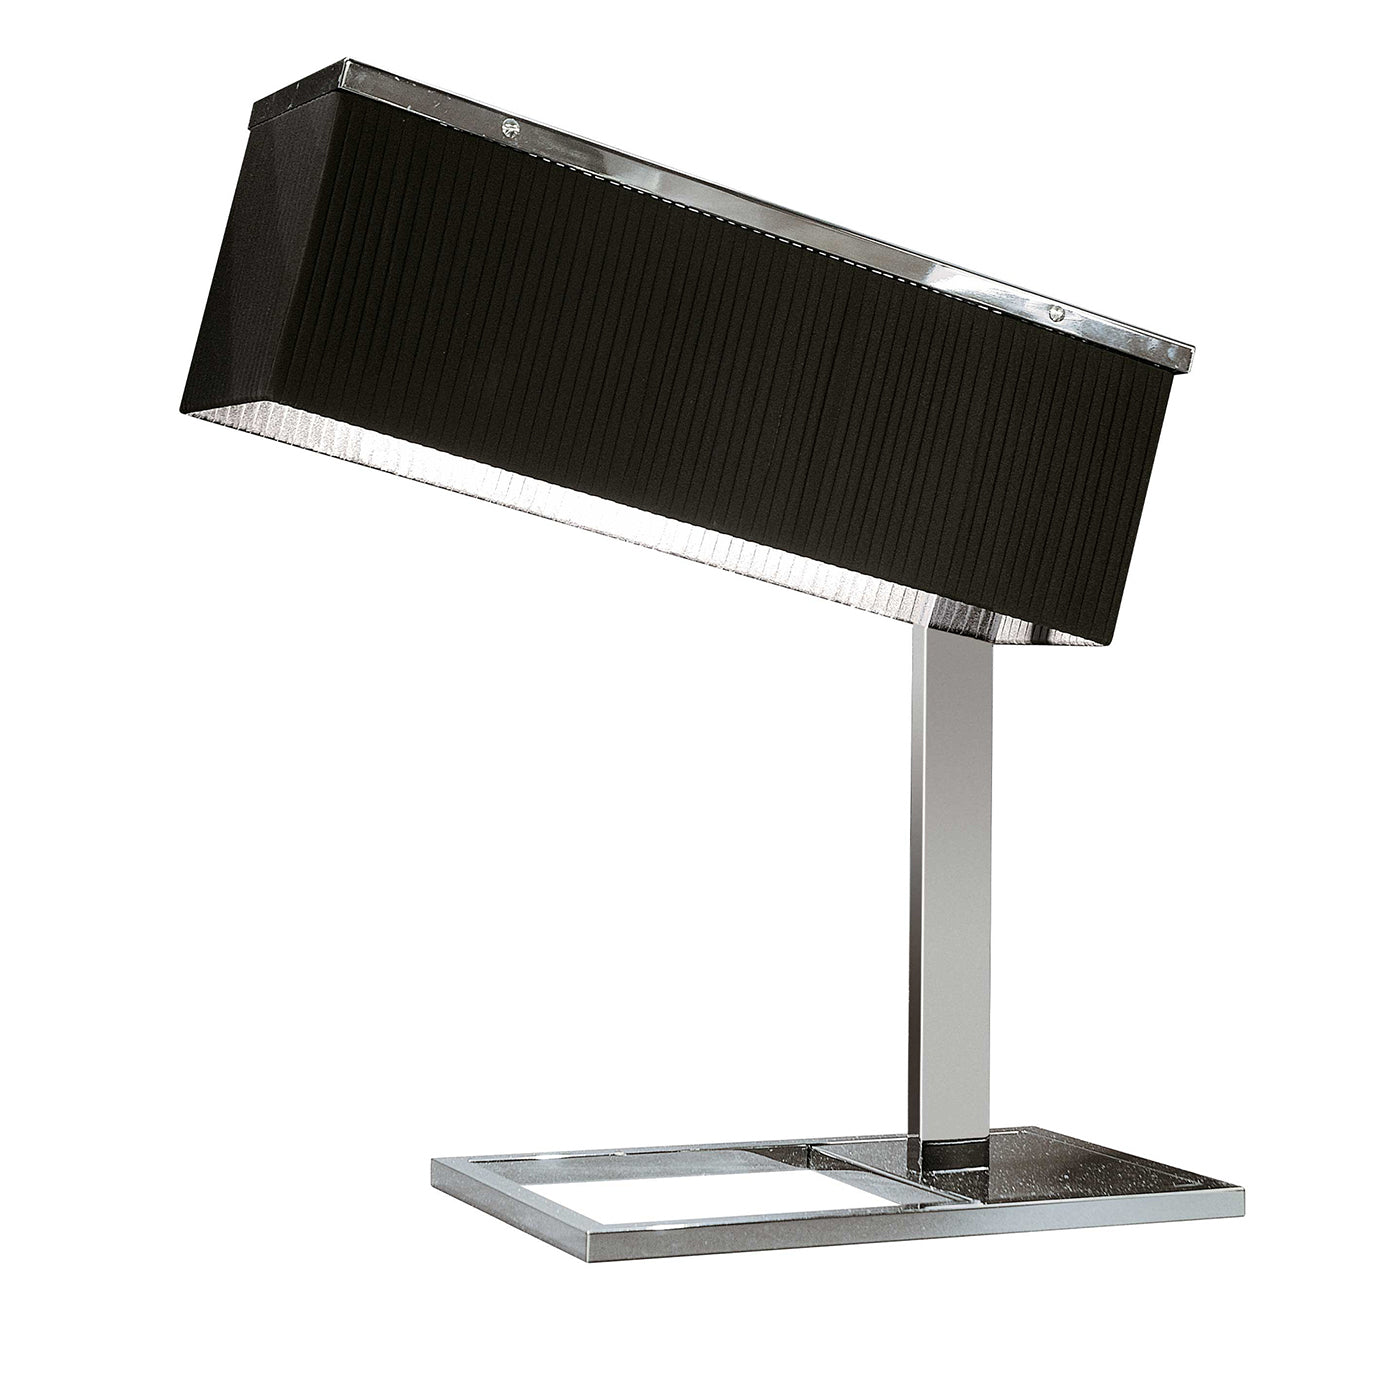 Gimko M Black Table Lamp by Arch. Luca Sgroi - Vue principale